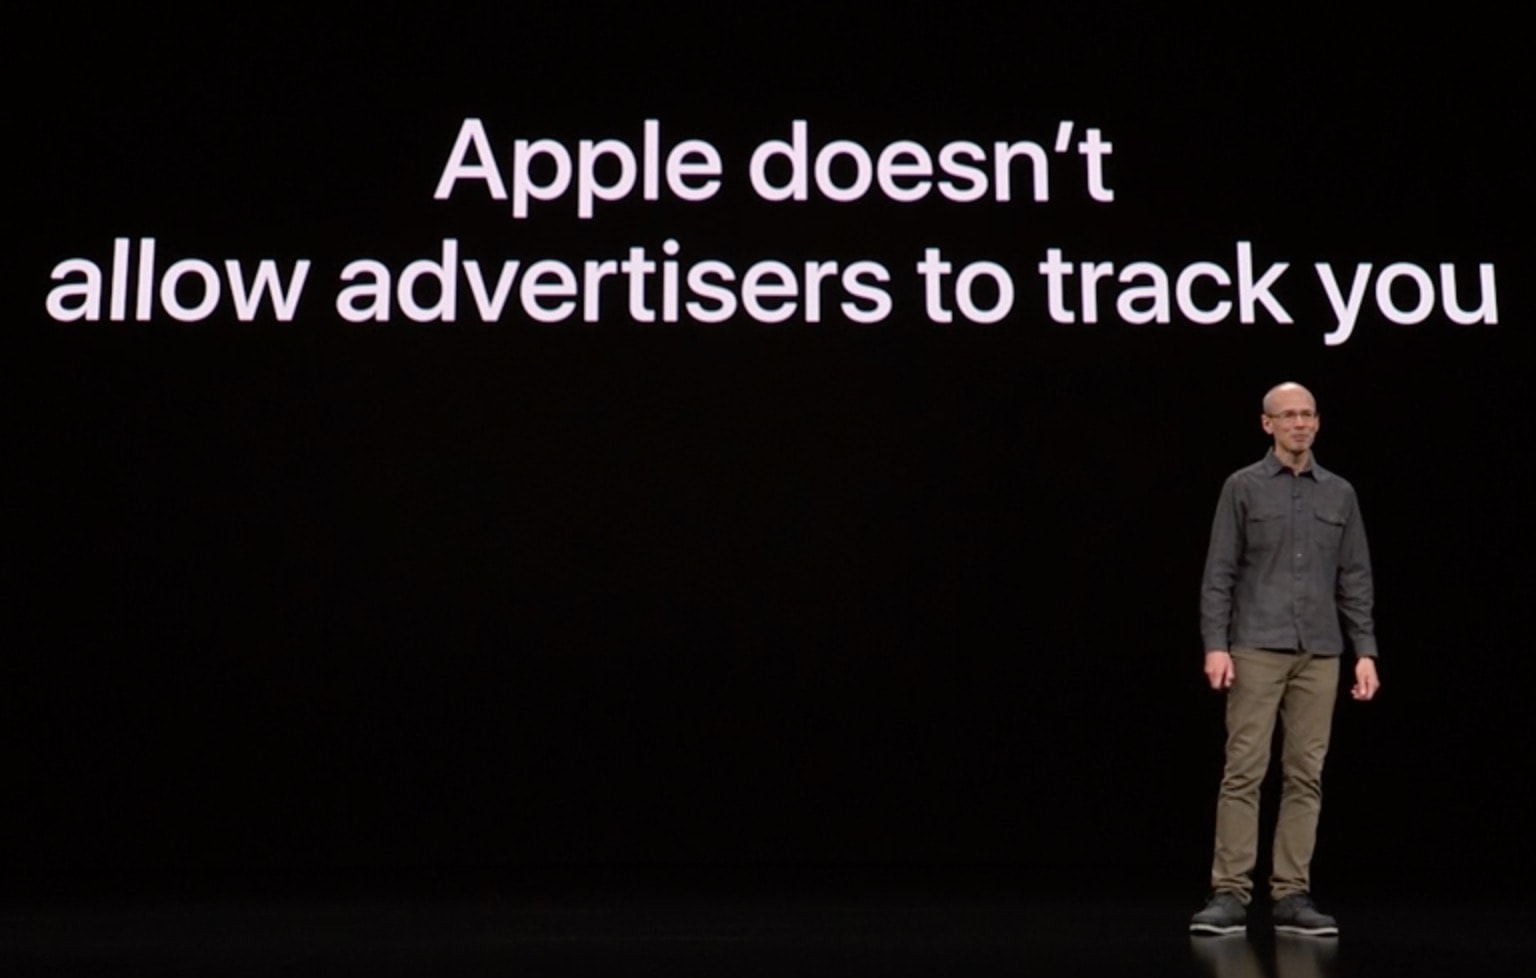 Roger Rosner, Apple's vice president of applications, touts the privacy features of Apple News+.